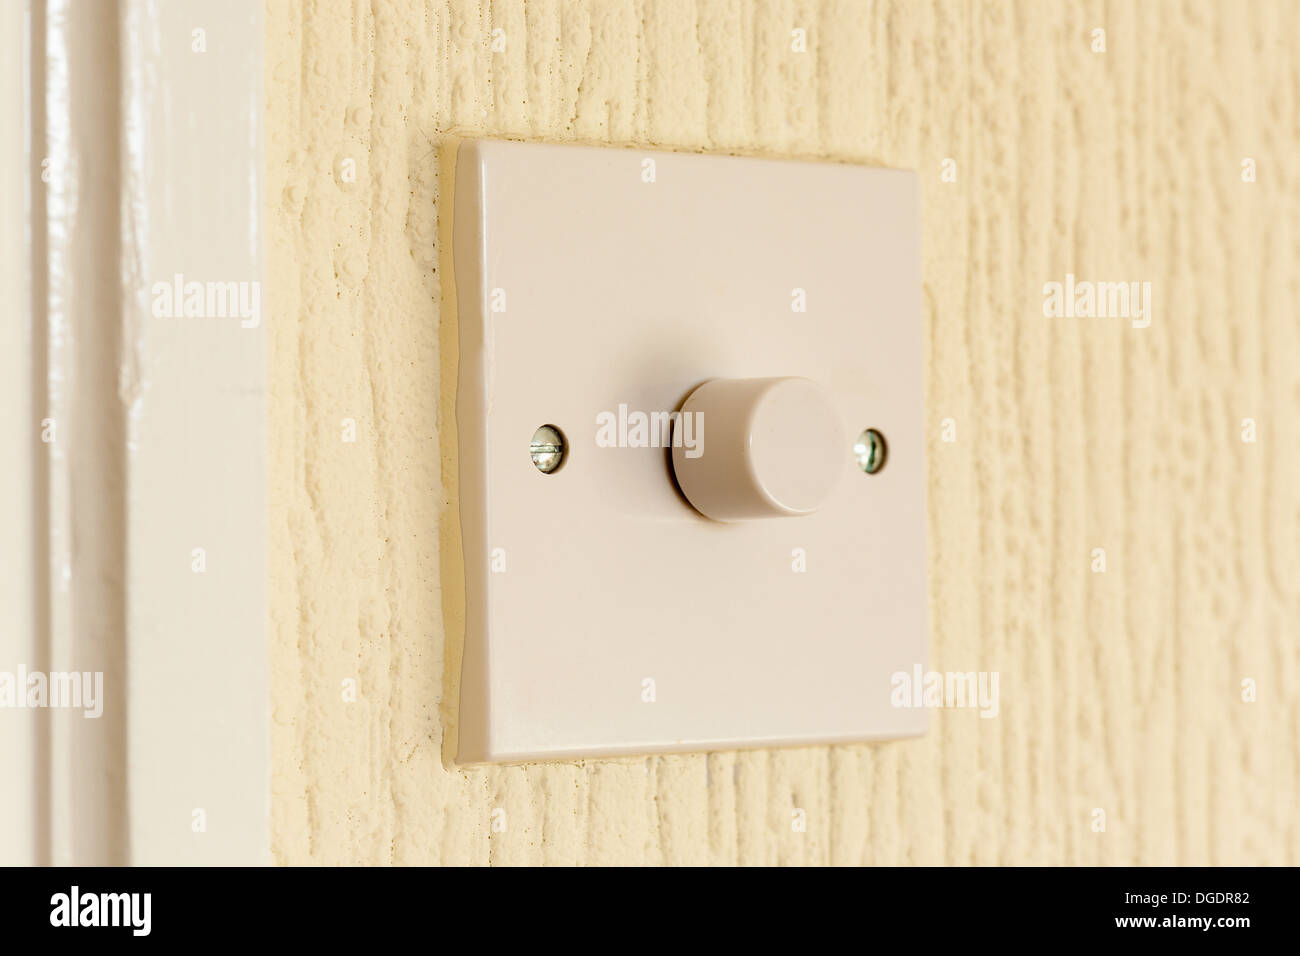 Electric light switch on wall Stock Photo